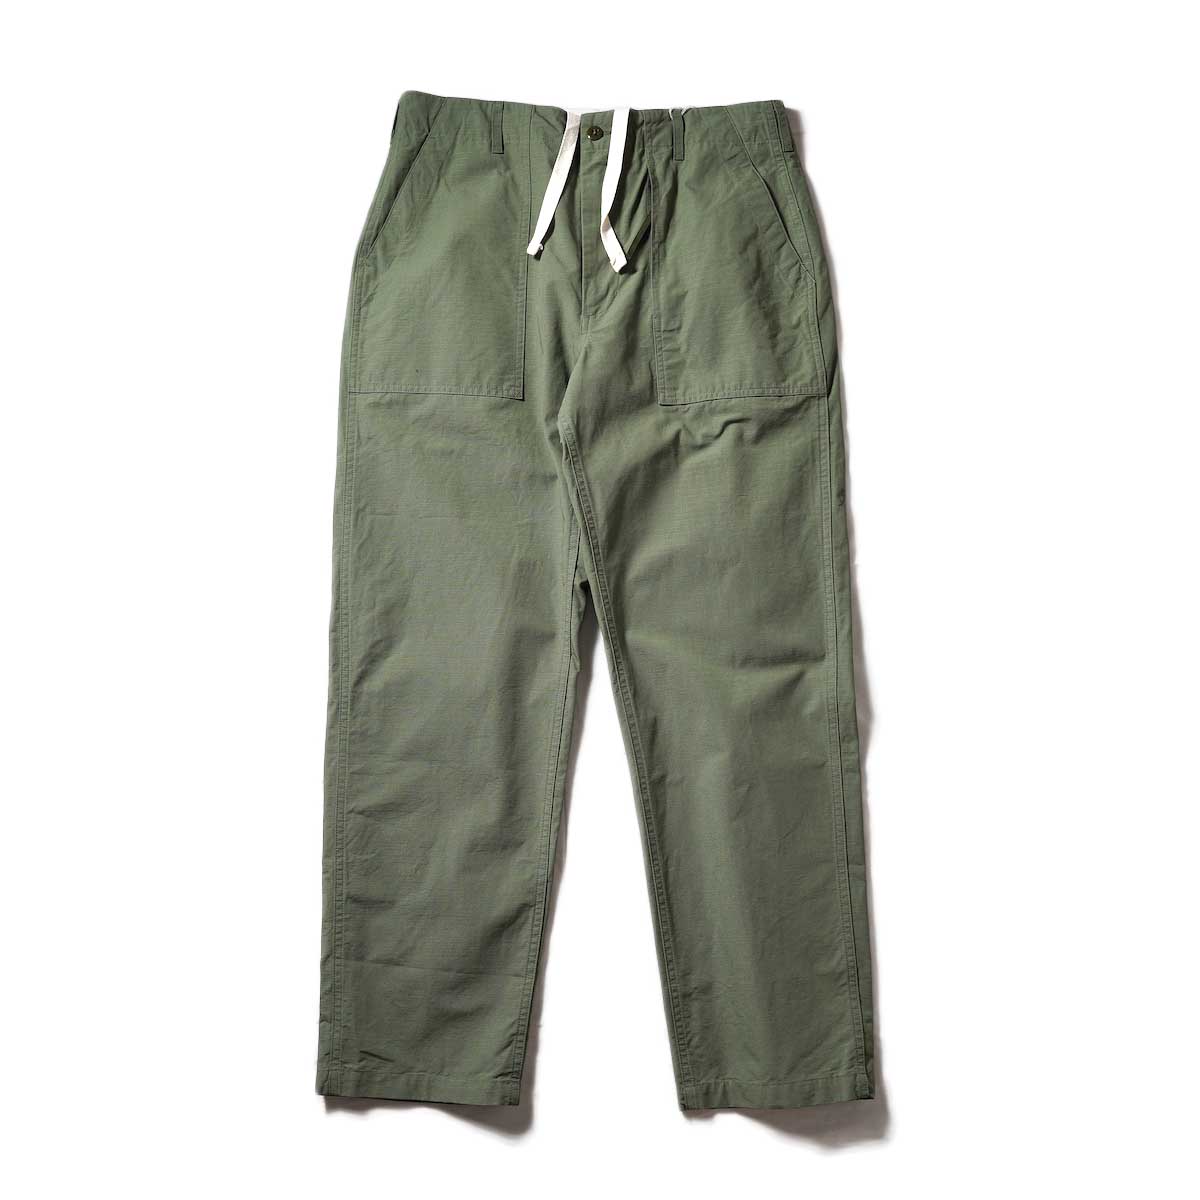 ENGINEERED GARMENTS / FATIGUE PANTS - Cotton Ripstop (Olive)